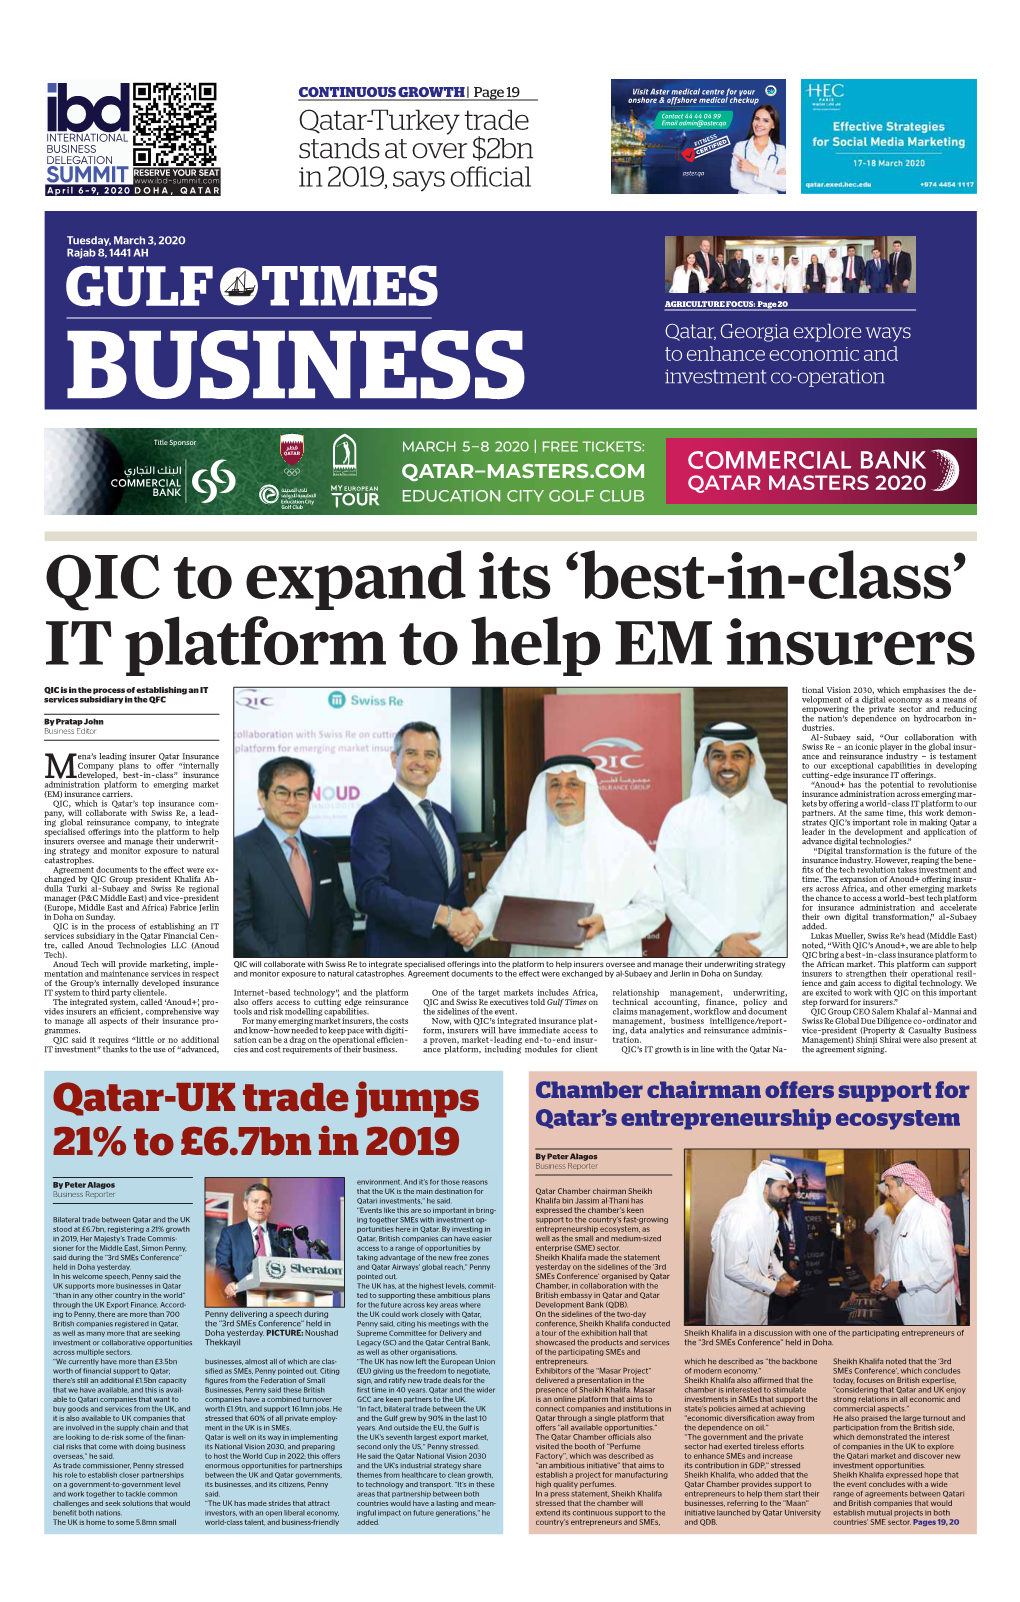 QIC to Expand Its 'Best-In-Class' IT Platform to Help EM Insurers